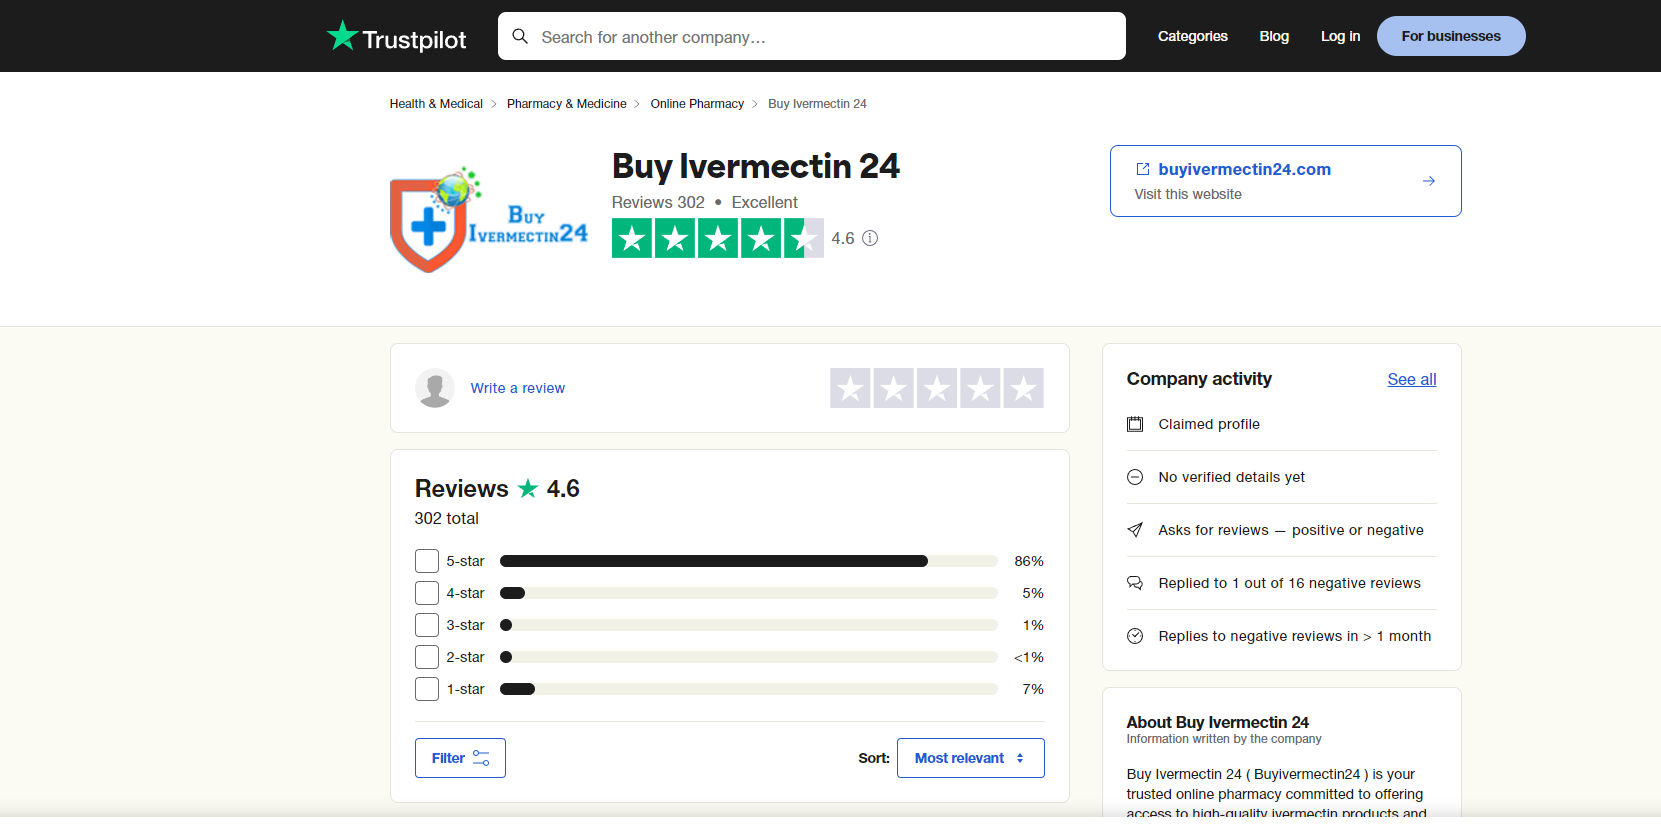 Trustpilot Unveiled: A Deep Dive into Reviews of Ivermectin 24